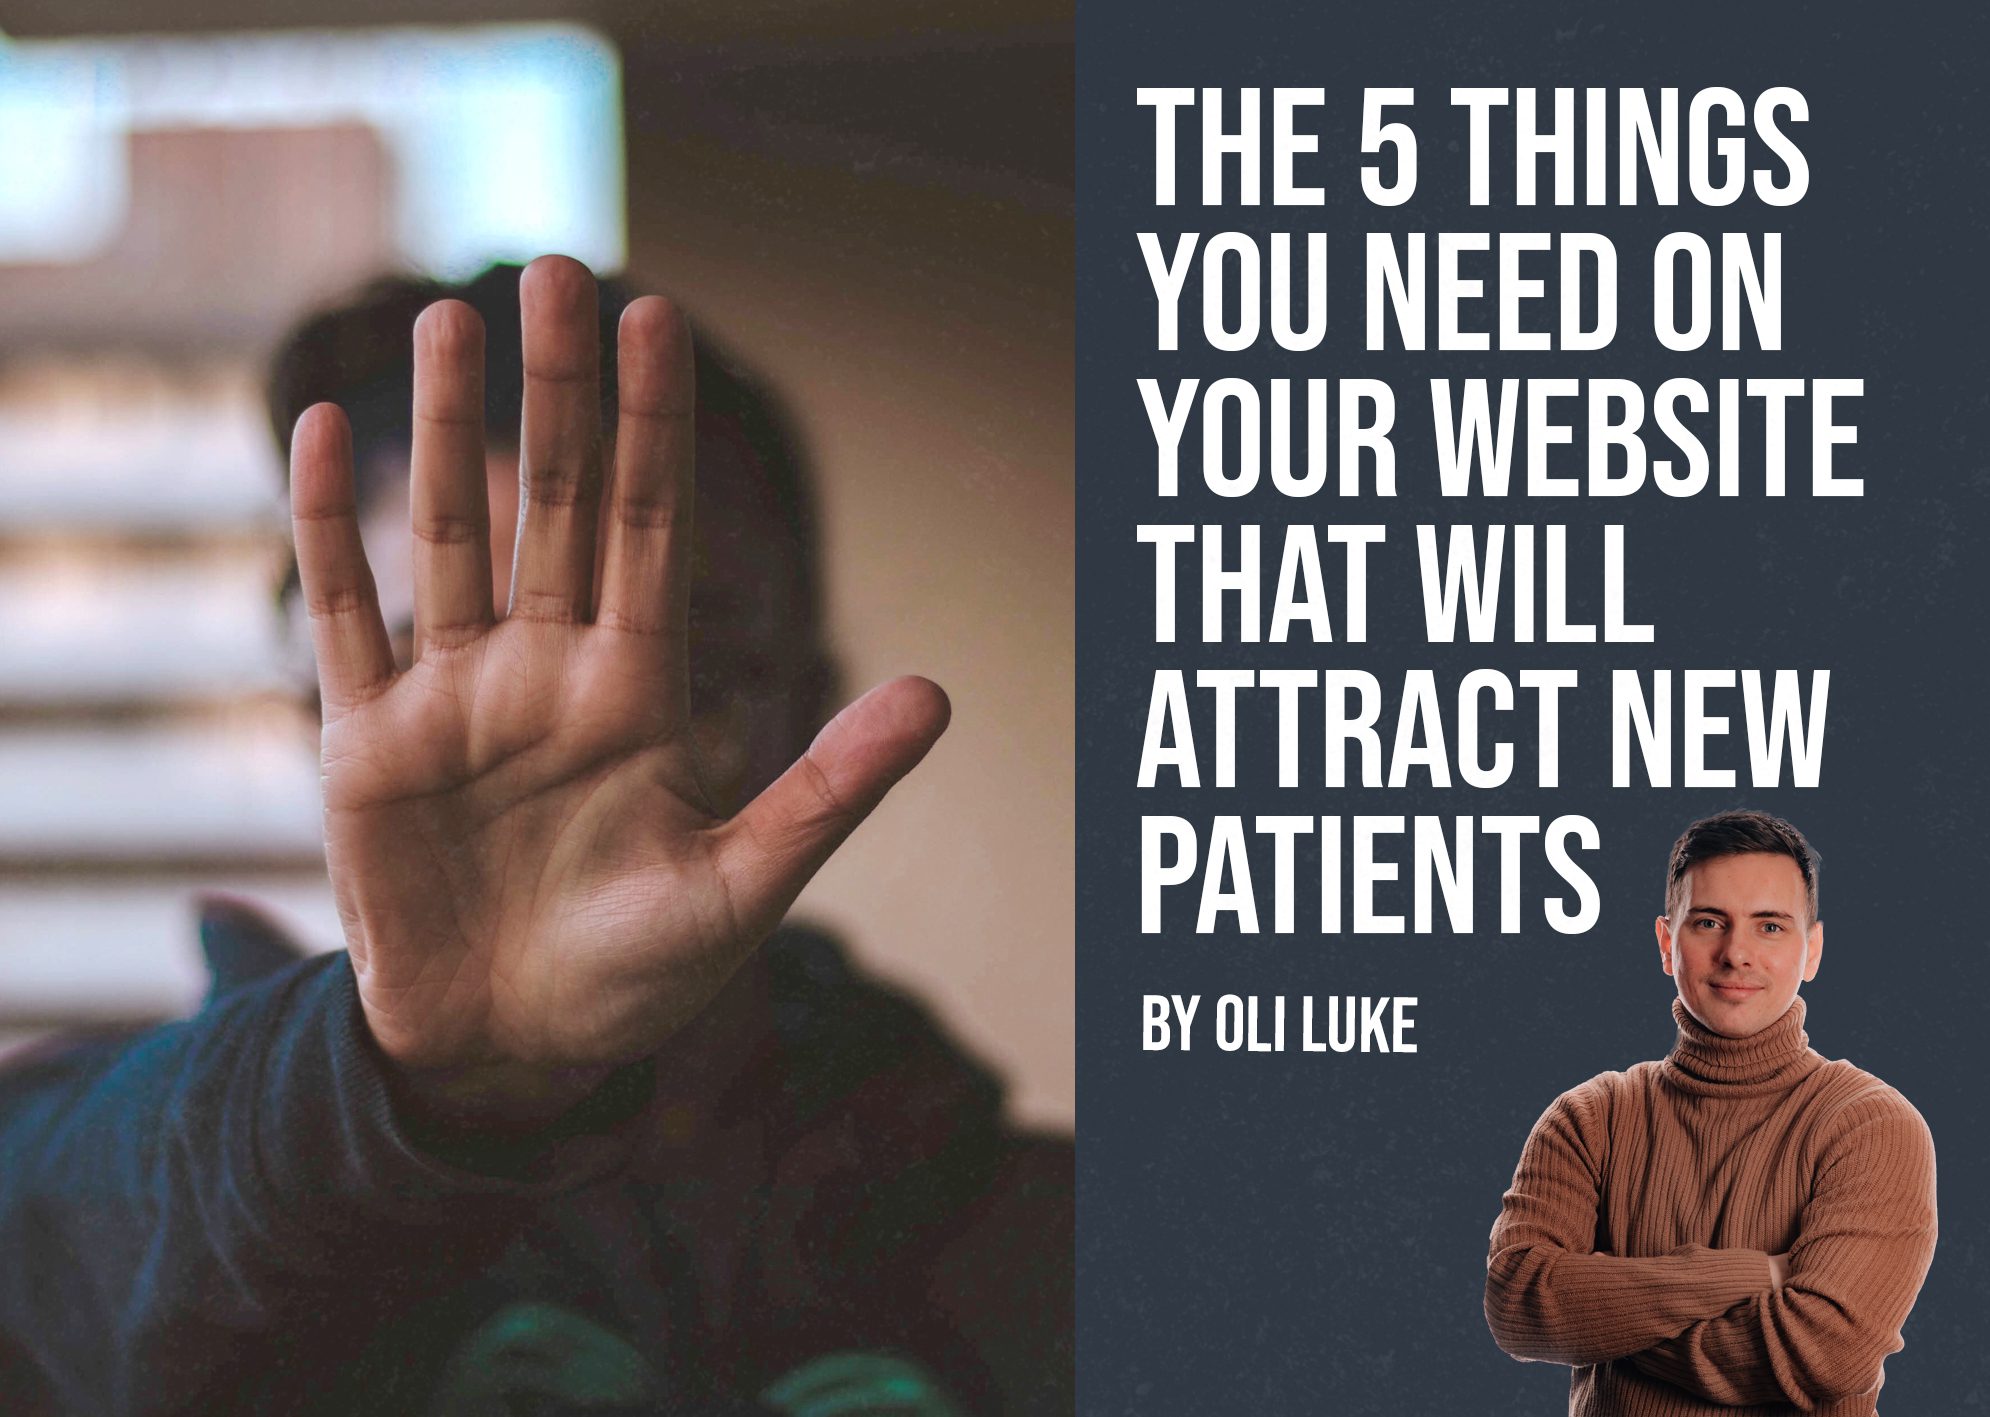 The 5 things you need on your website that will attract new patients image